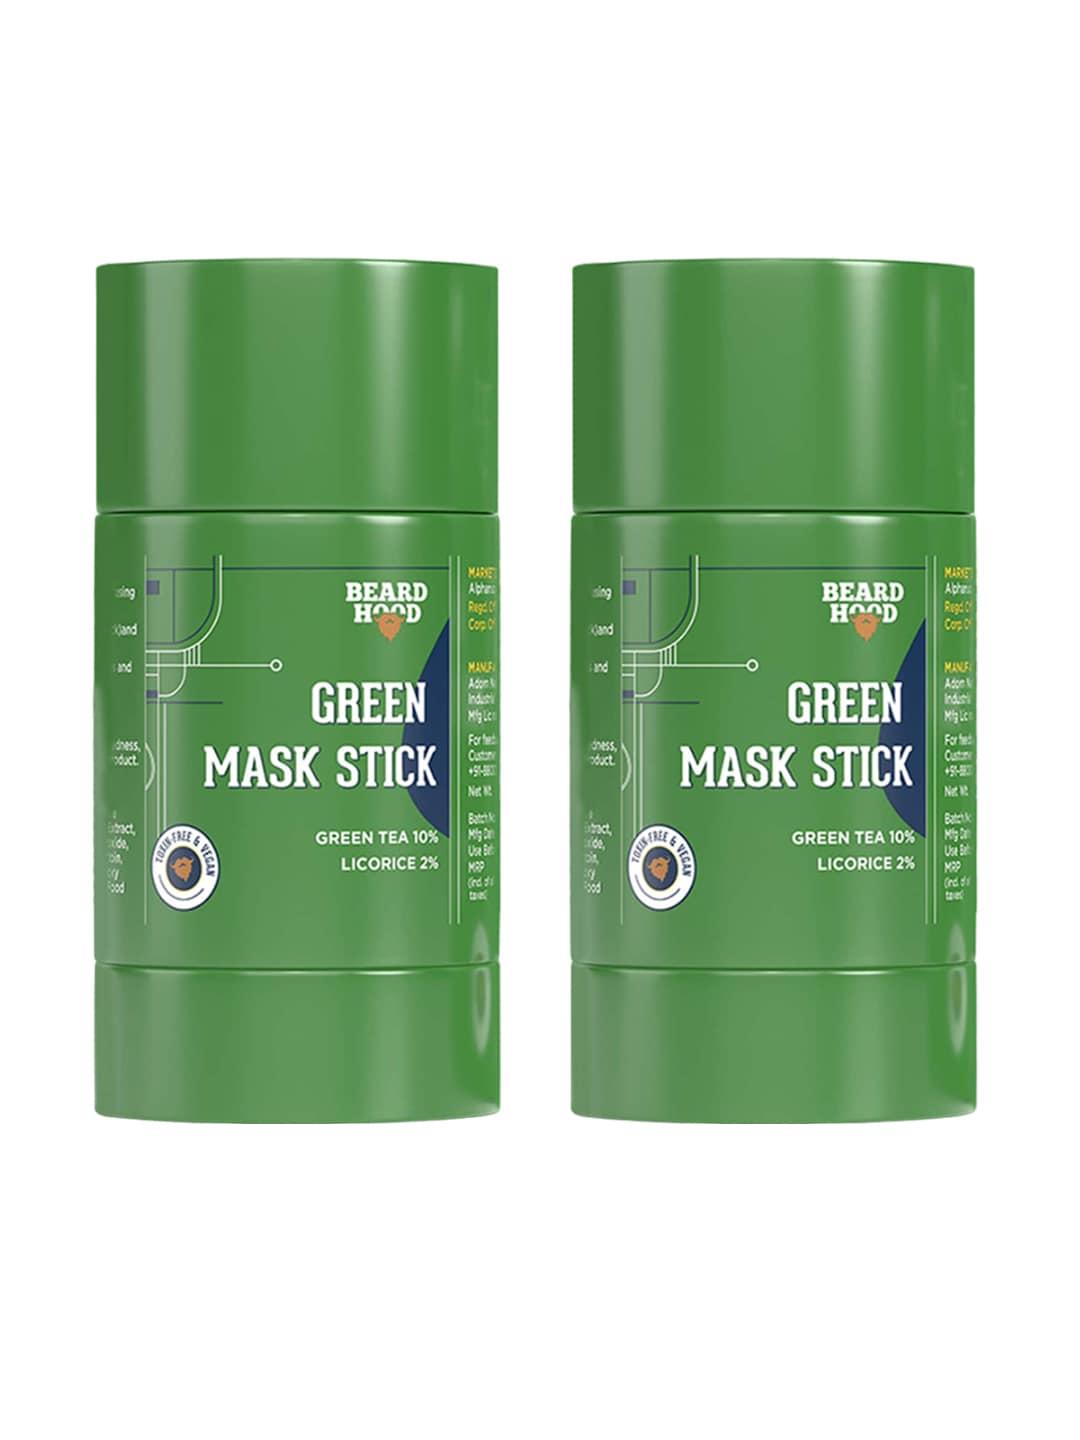 Beardhood Set Of 2 Green Cleansing Mask Stick With Green Tea+Licorice - 40g Each